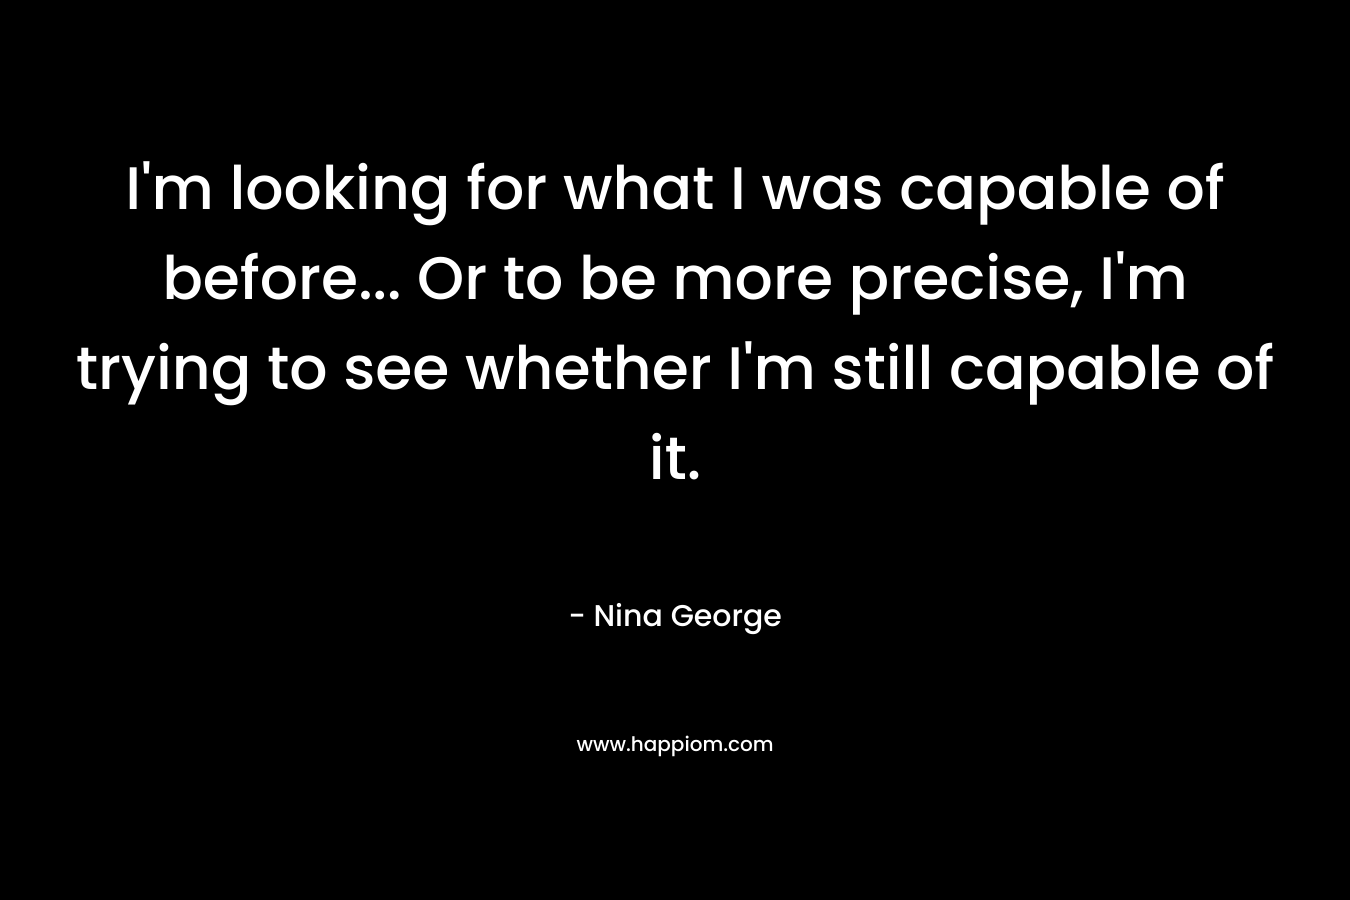 I’m looking for what I was capable of before… Or to be more precise, I’m trying to see whether I’m still capable of it. – Nina George